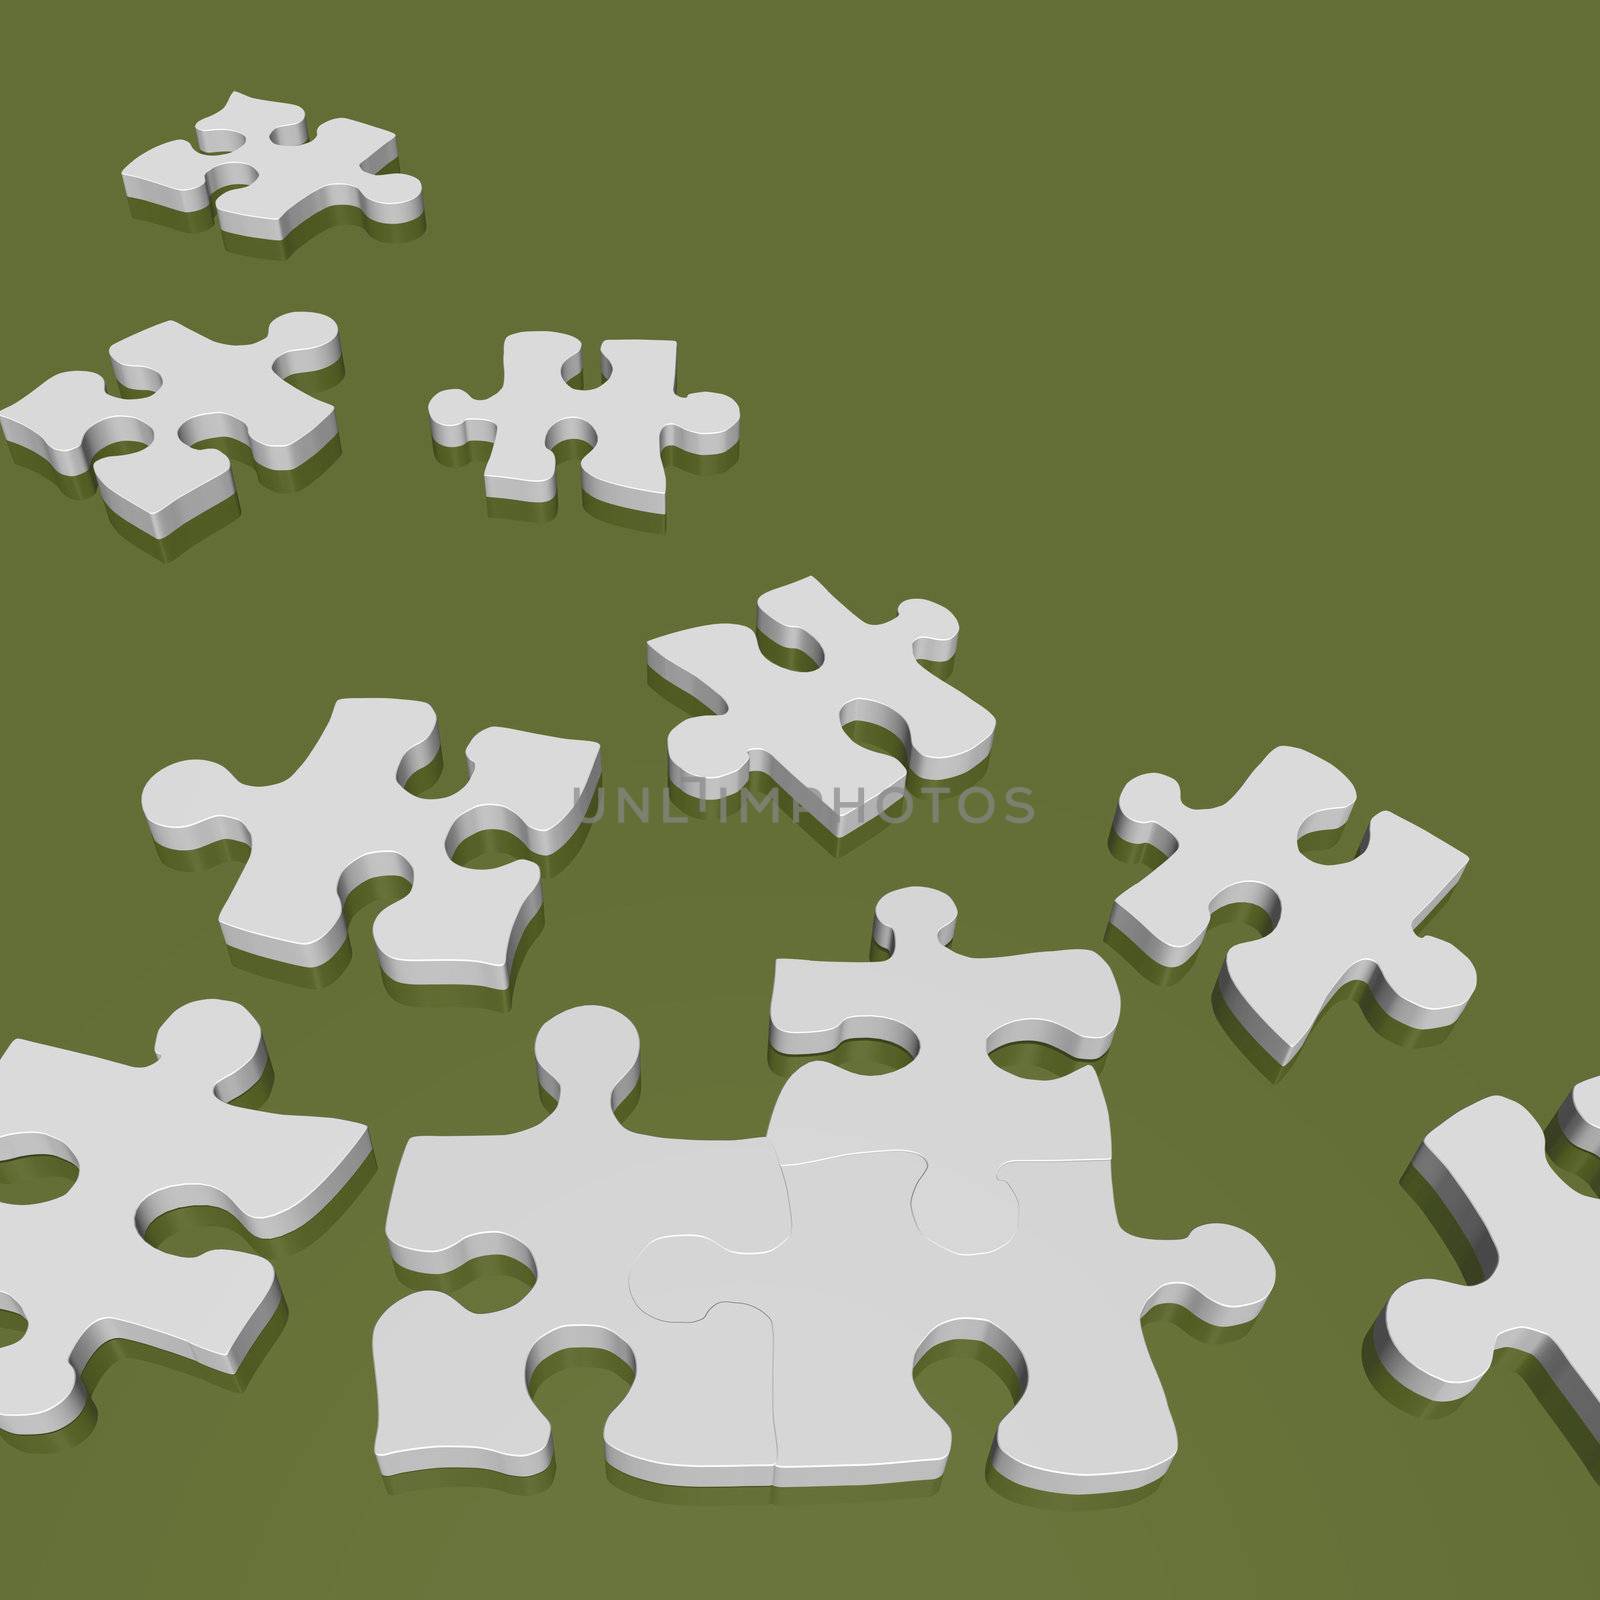 Image of 3D puzzle pieces on a green background.